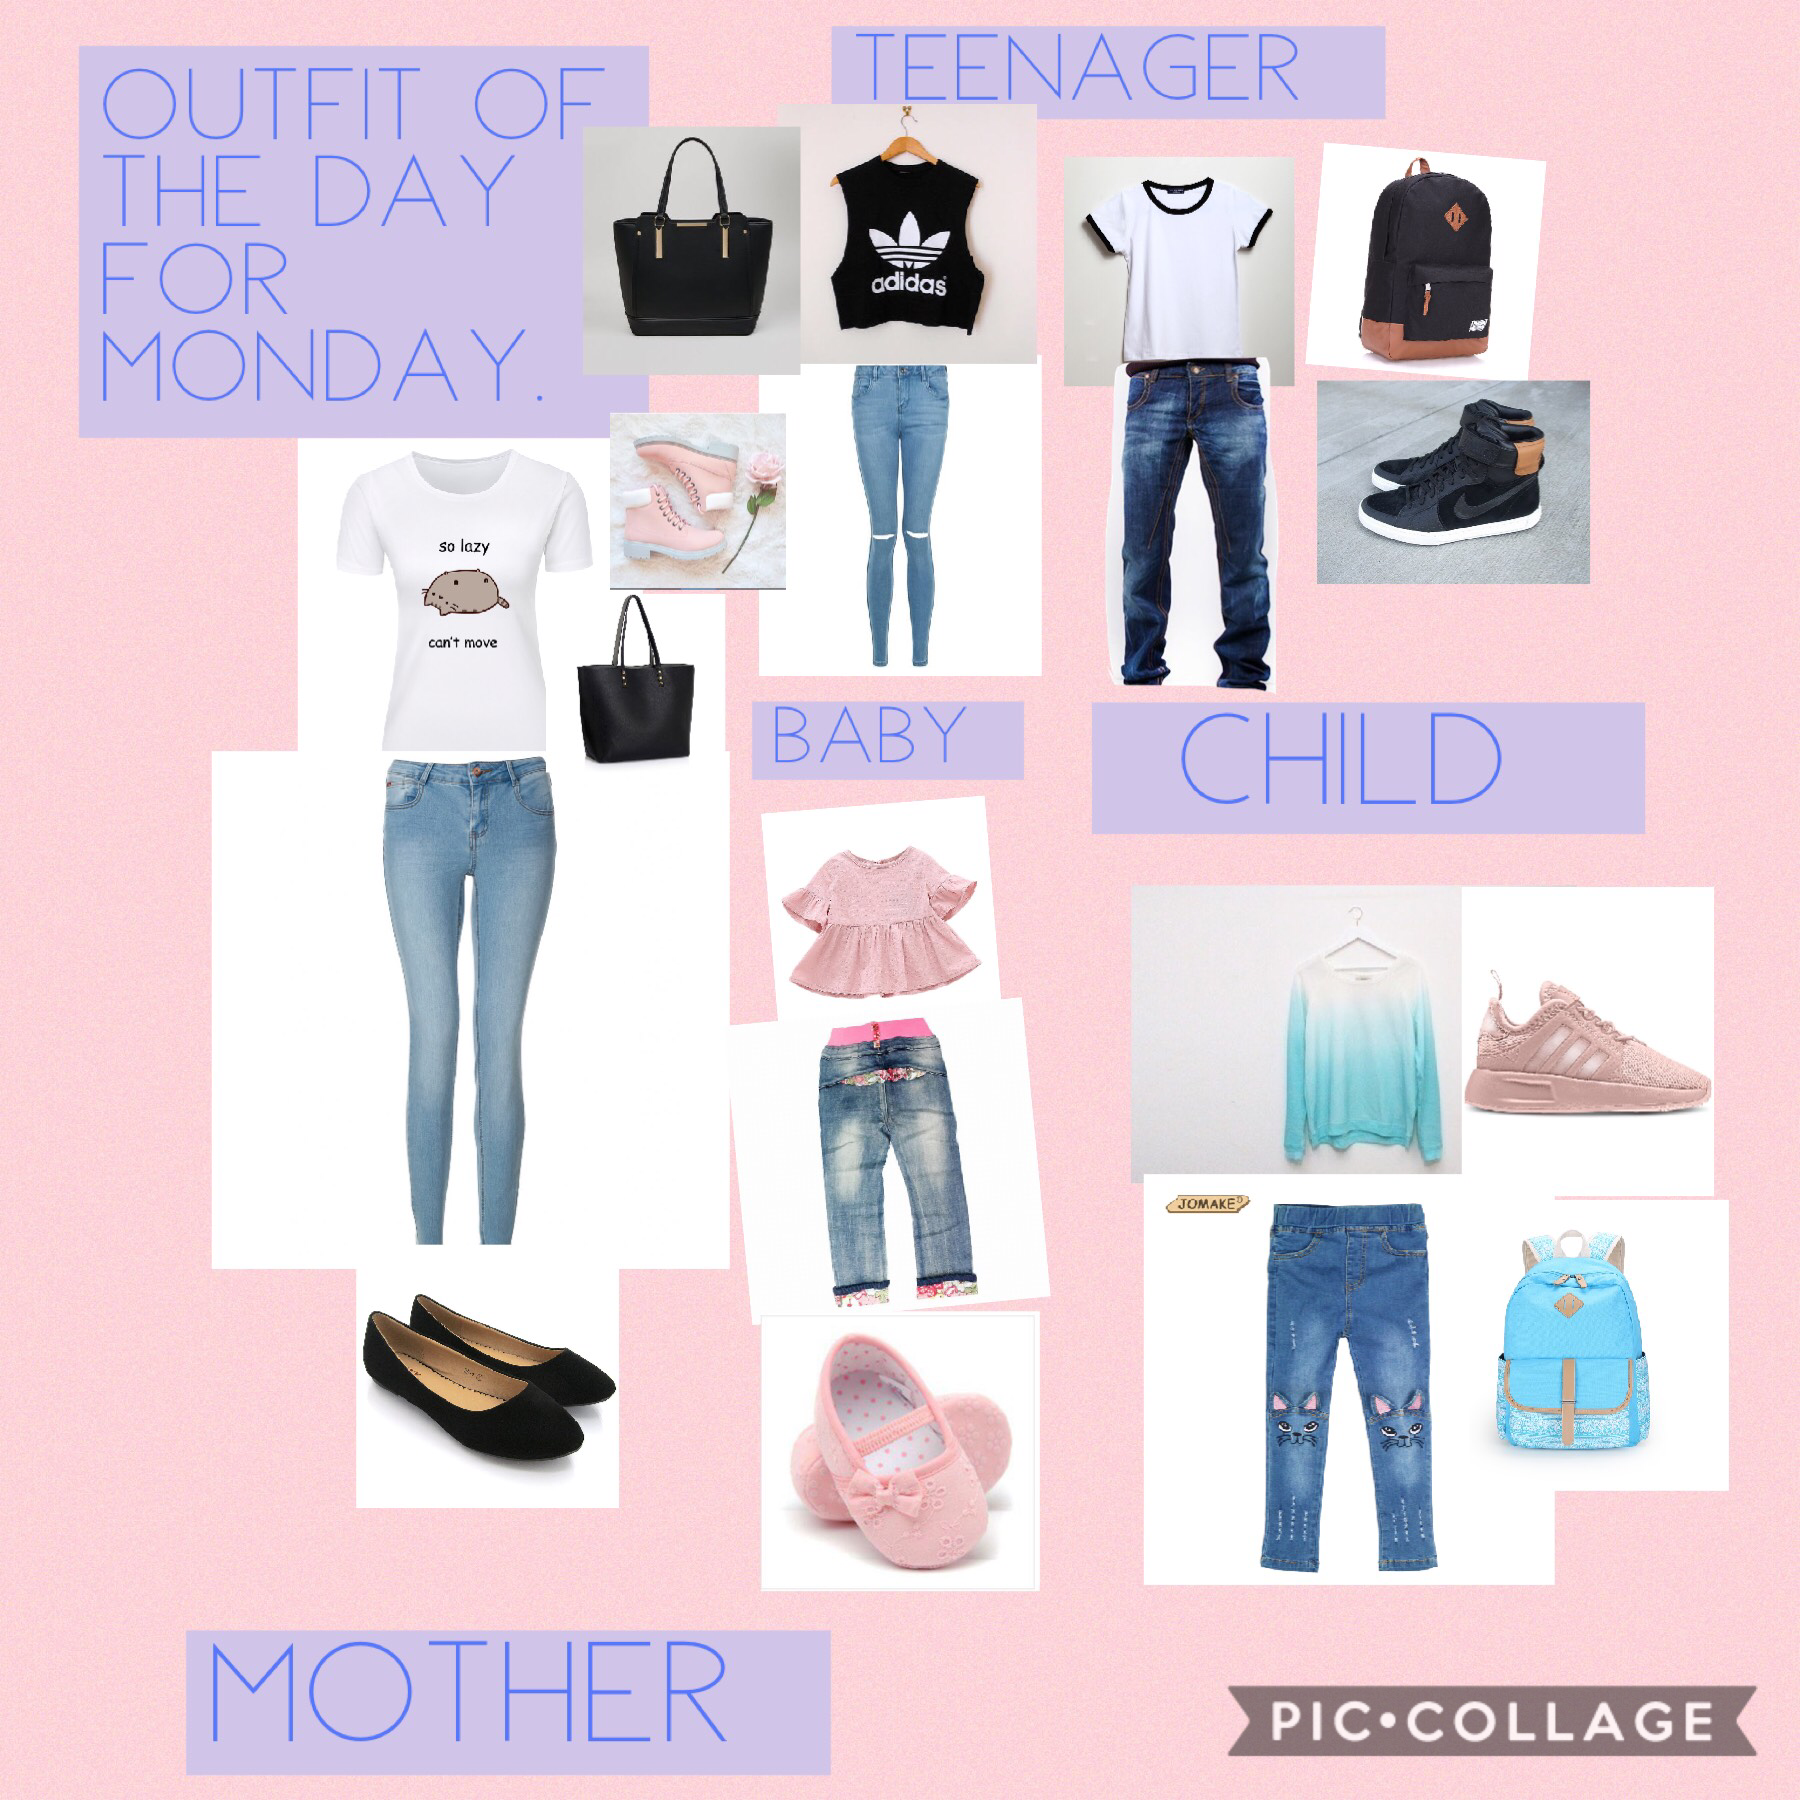 💍👚👕👖👔👗👘👠👙👡👟👞👢🧦🧤🧣💼👝🎒👛👜👓⛑🎓🎩🧢👒👑press
There is an outfit for the mum, the teenage girl, the teenage boy, the young girl and the baby.😀